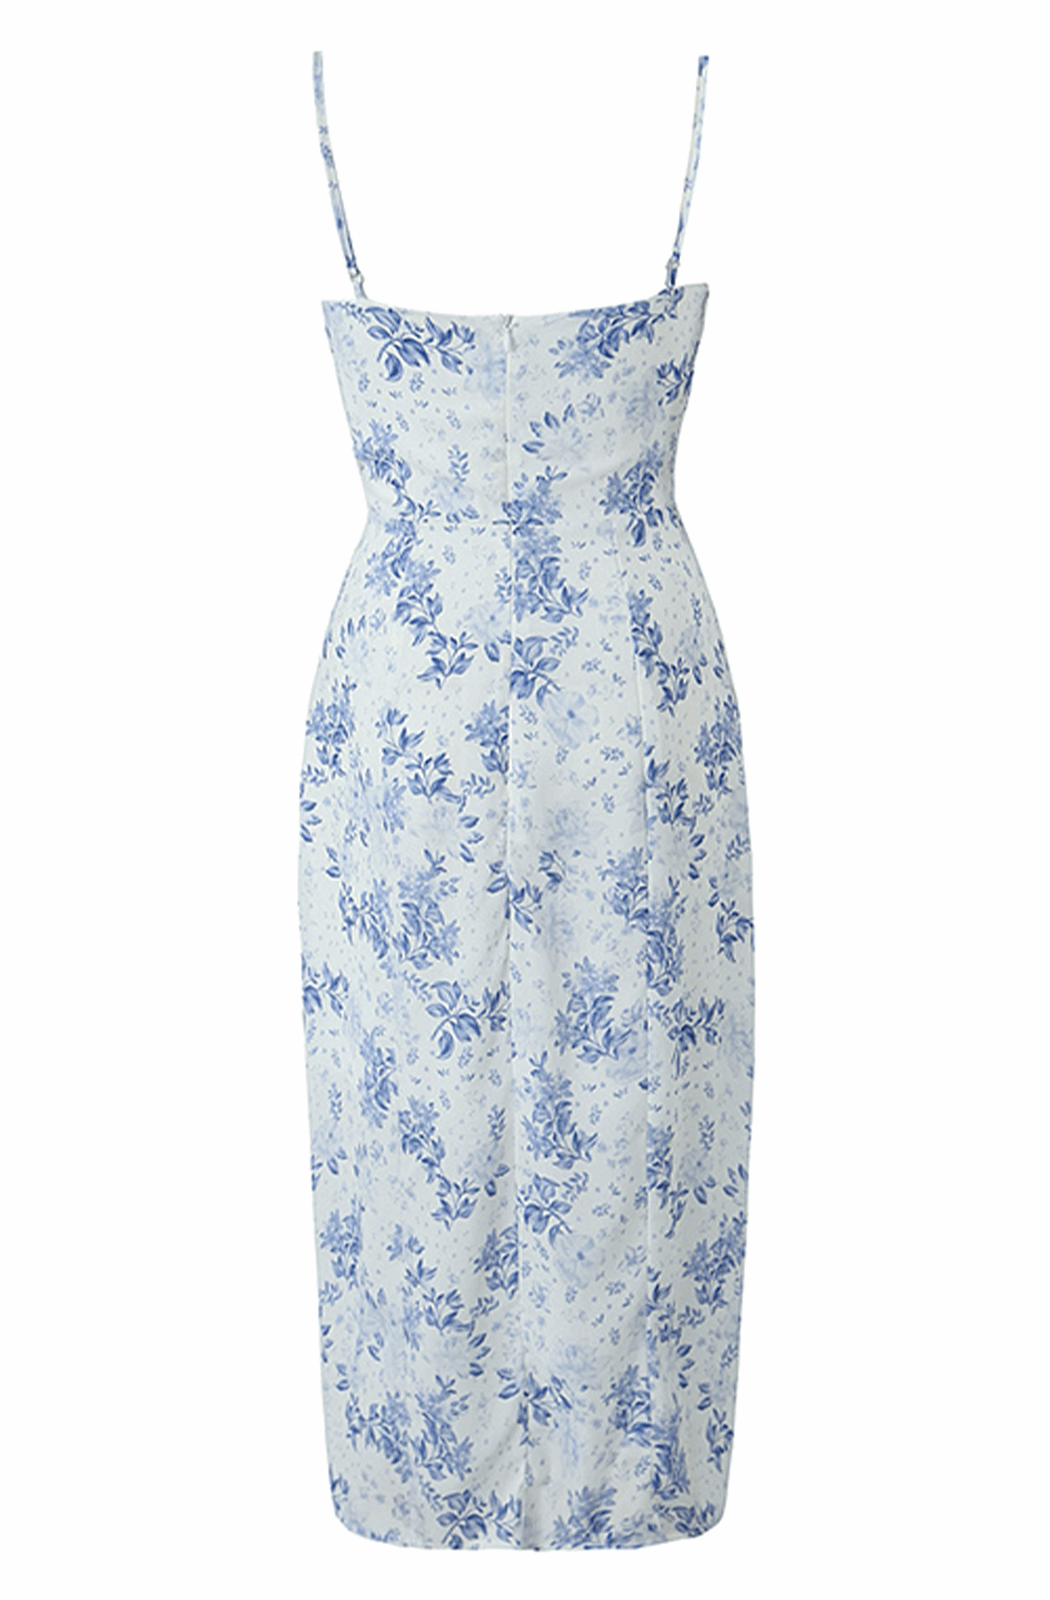 Blue and white floral midi dress